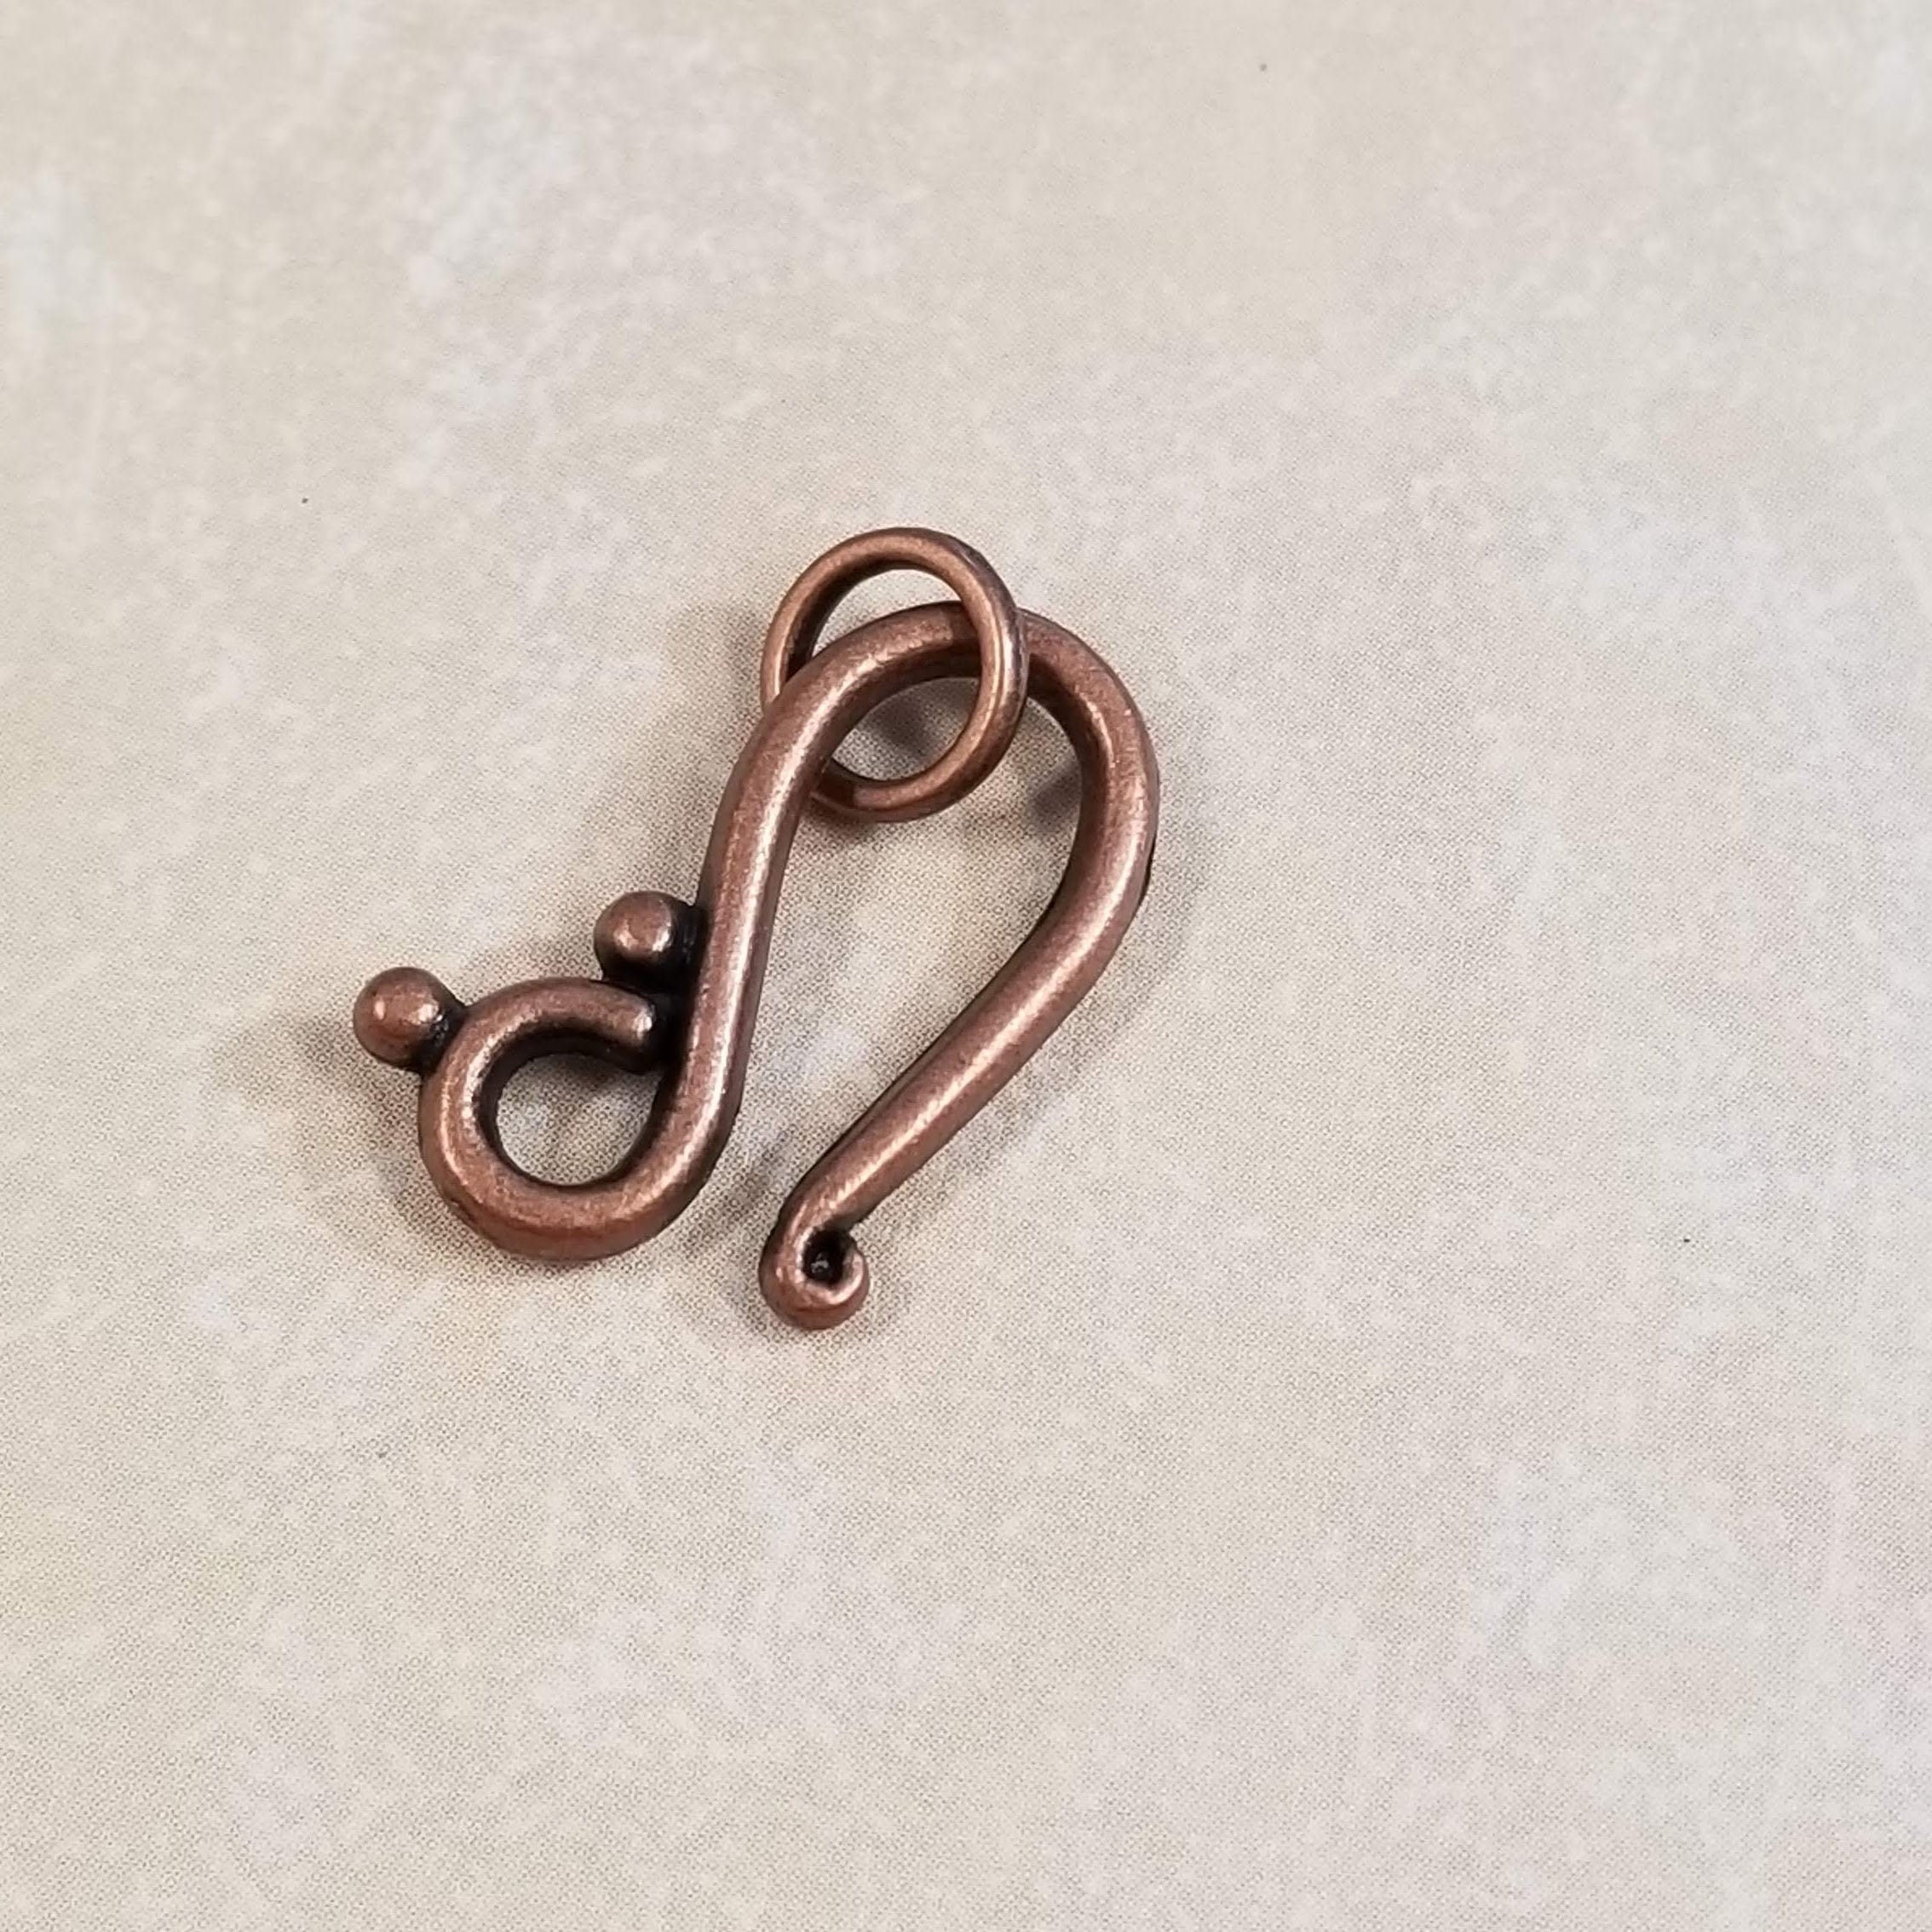 39-293-7 Antiqued Copper Plated Hook and Eye Clasp - Rings & Things